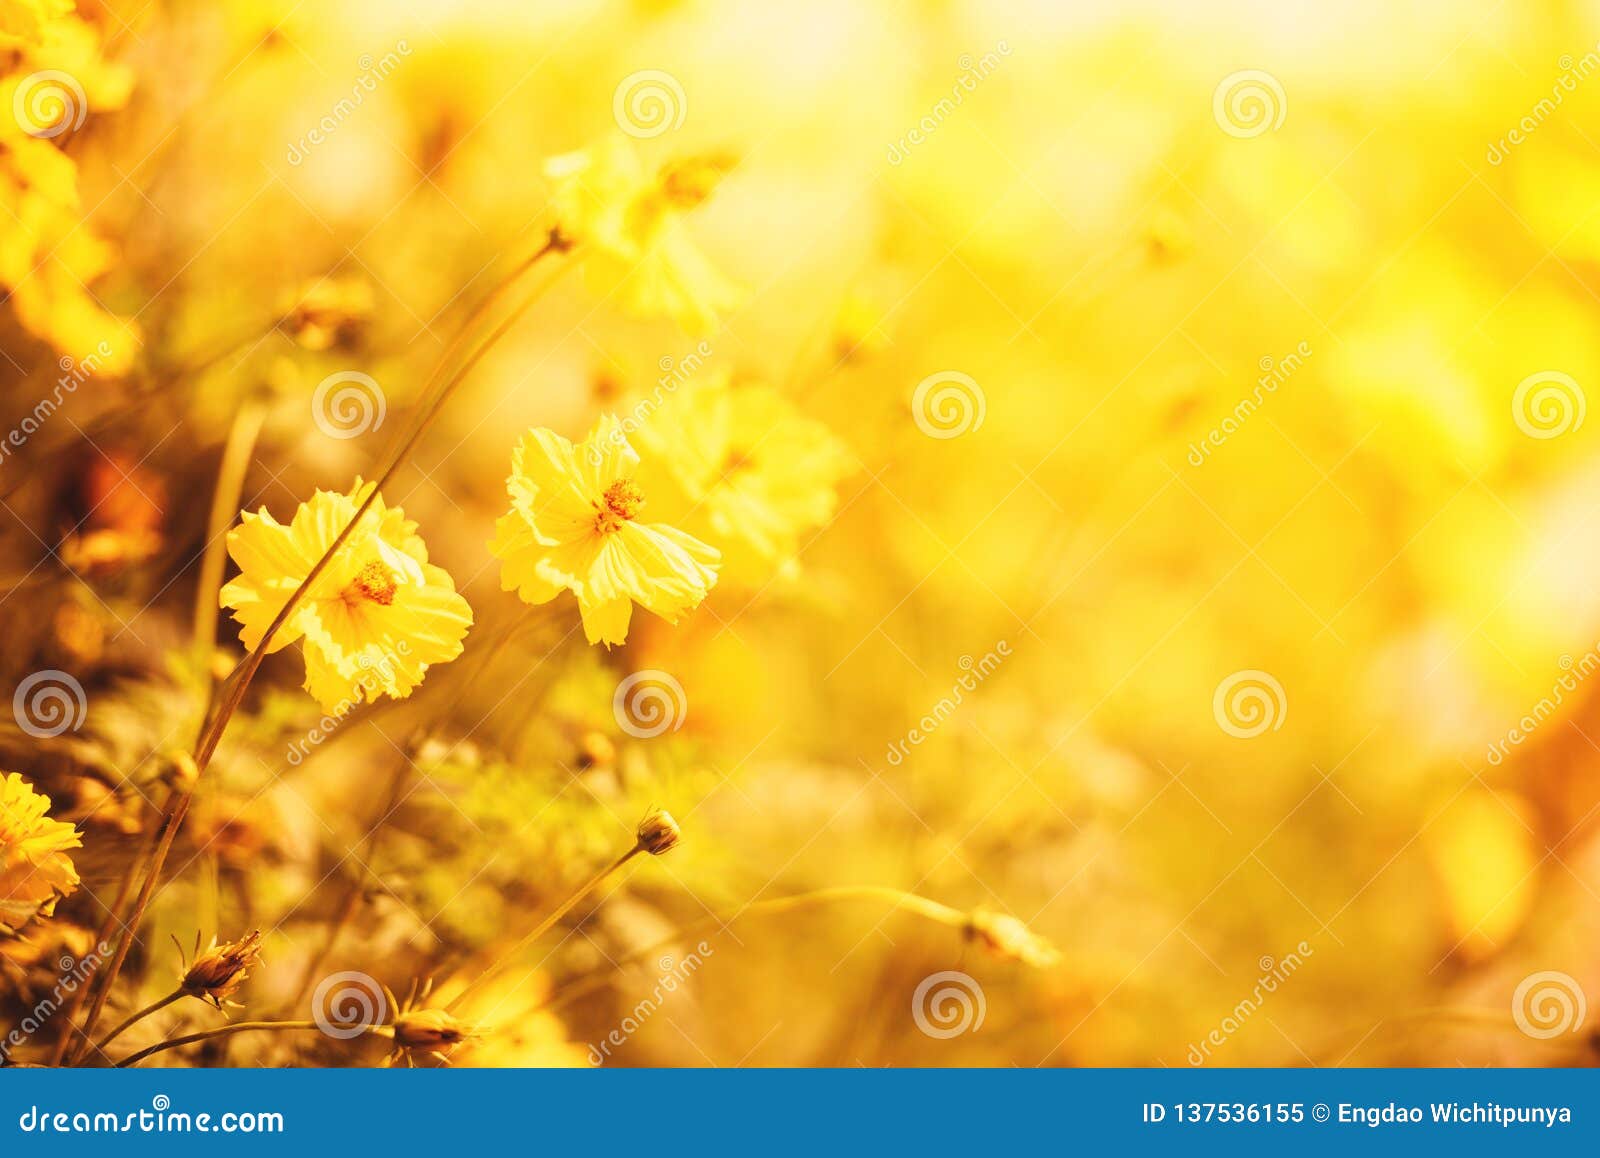 Nature Yellow Flower Field Blur Background Yellow Plant Calendula Autumn  Colors Beautiful in the Garden Stock Image - Image of bloom, tulip:  137536155